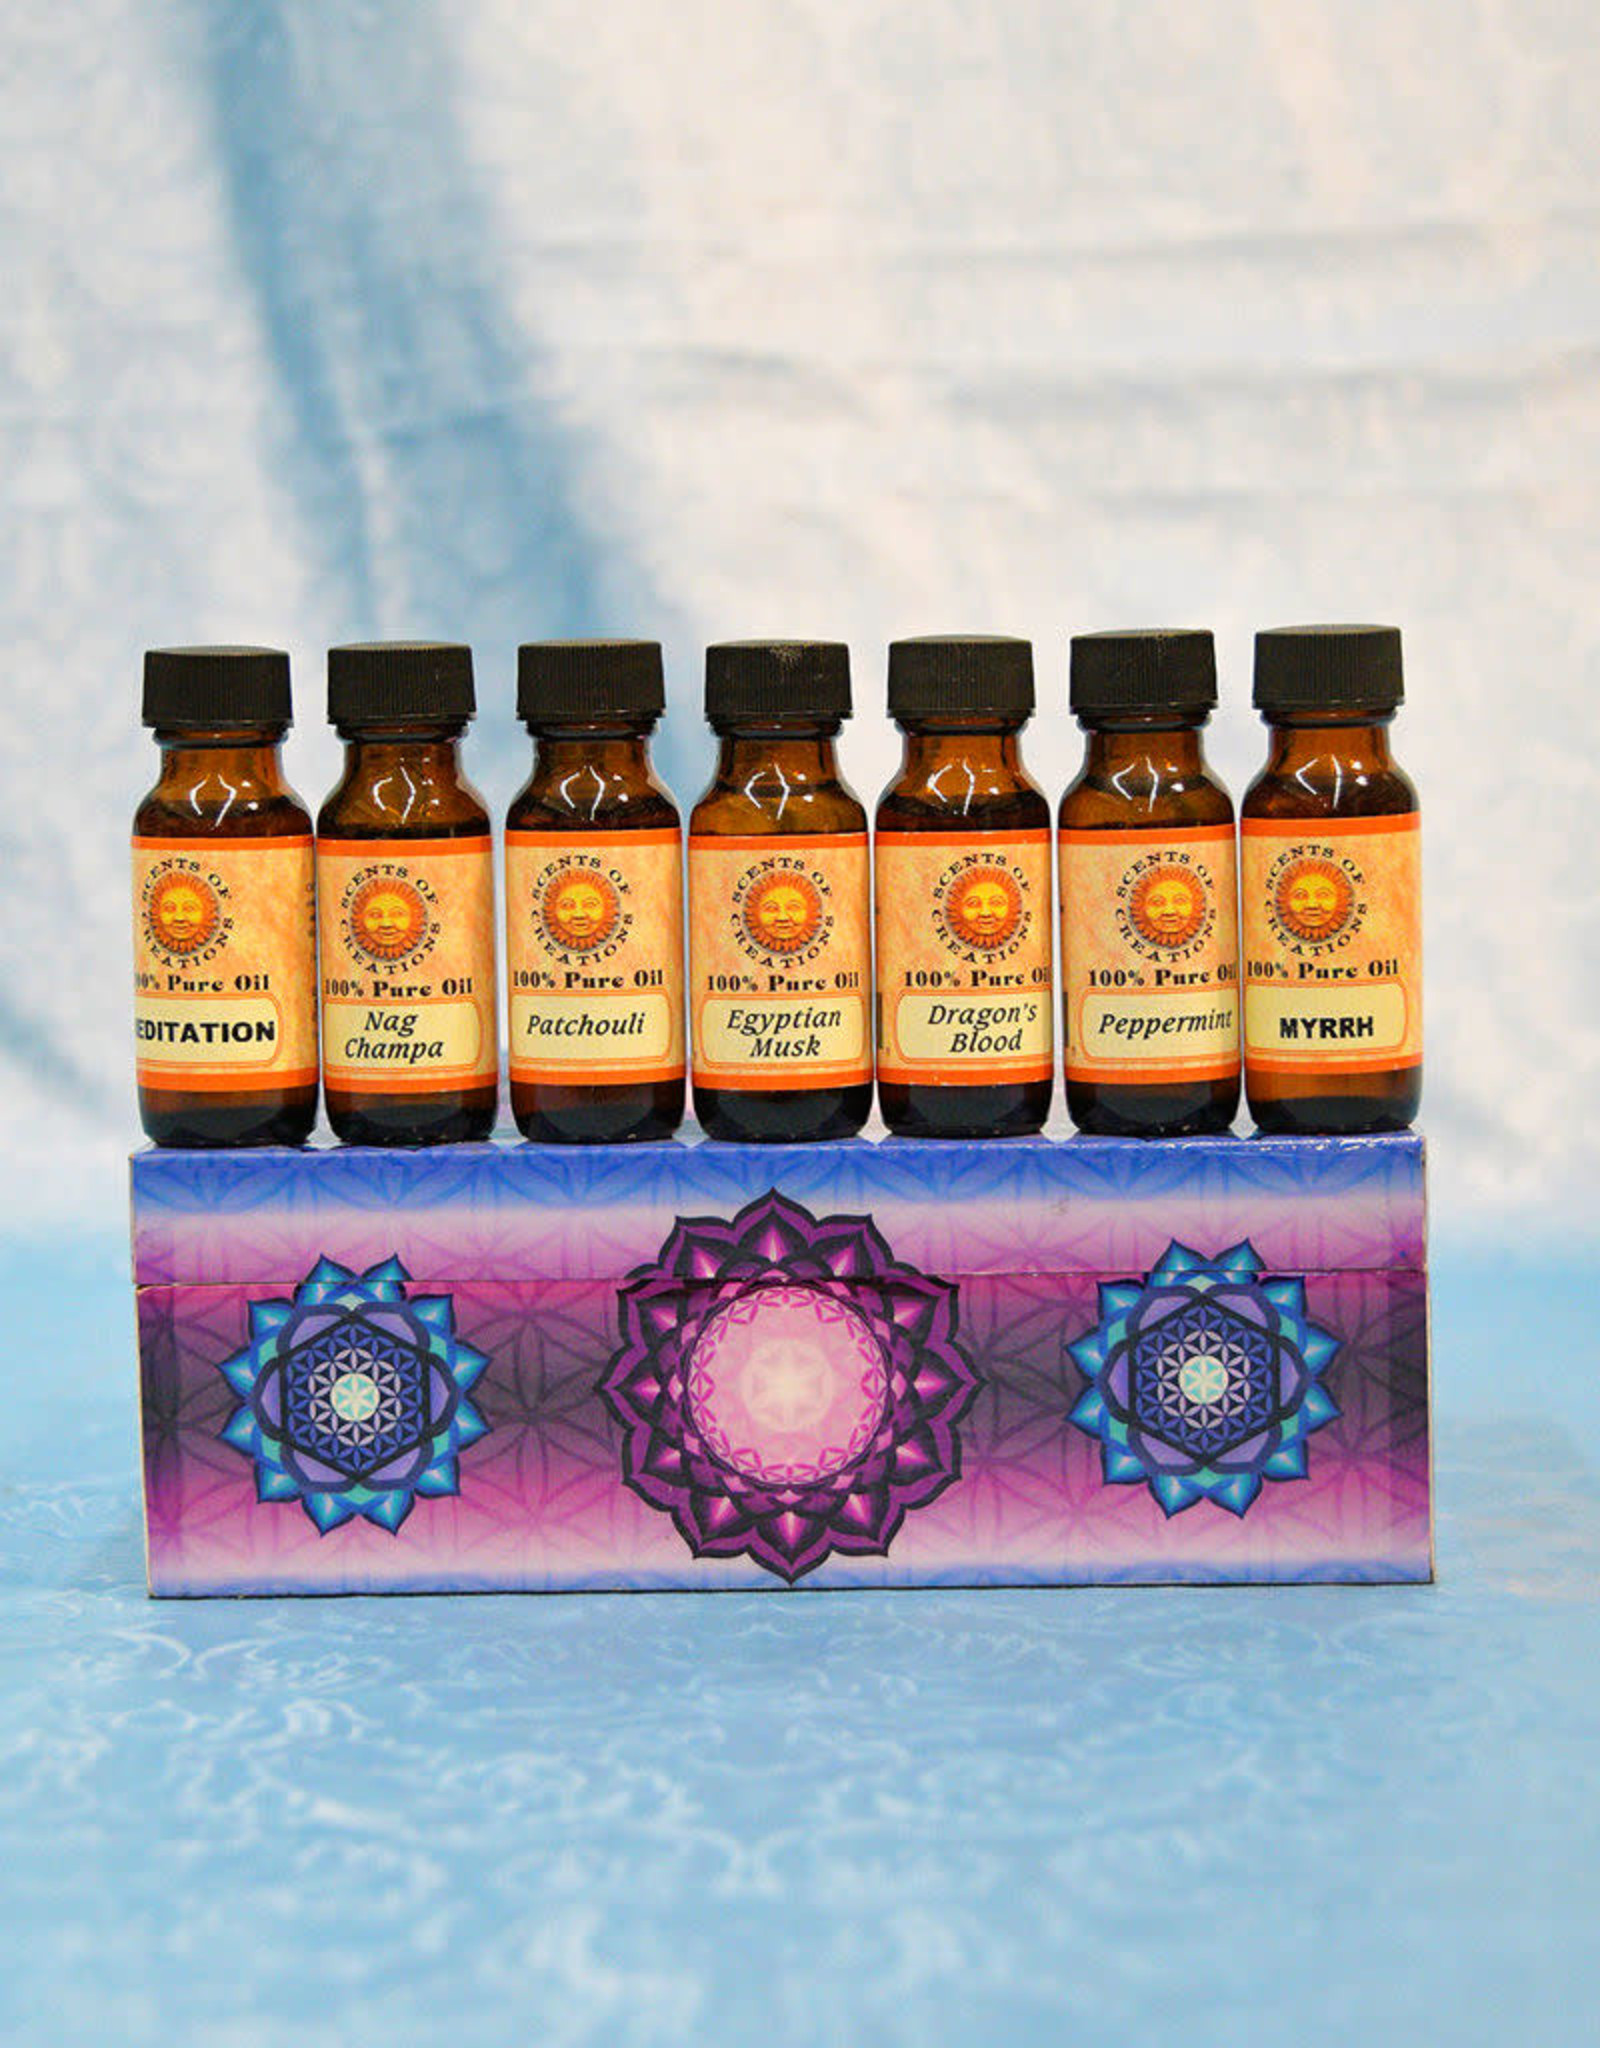 Scents of Creations Fragrance Oil - Cinnamon